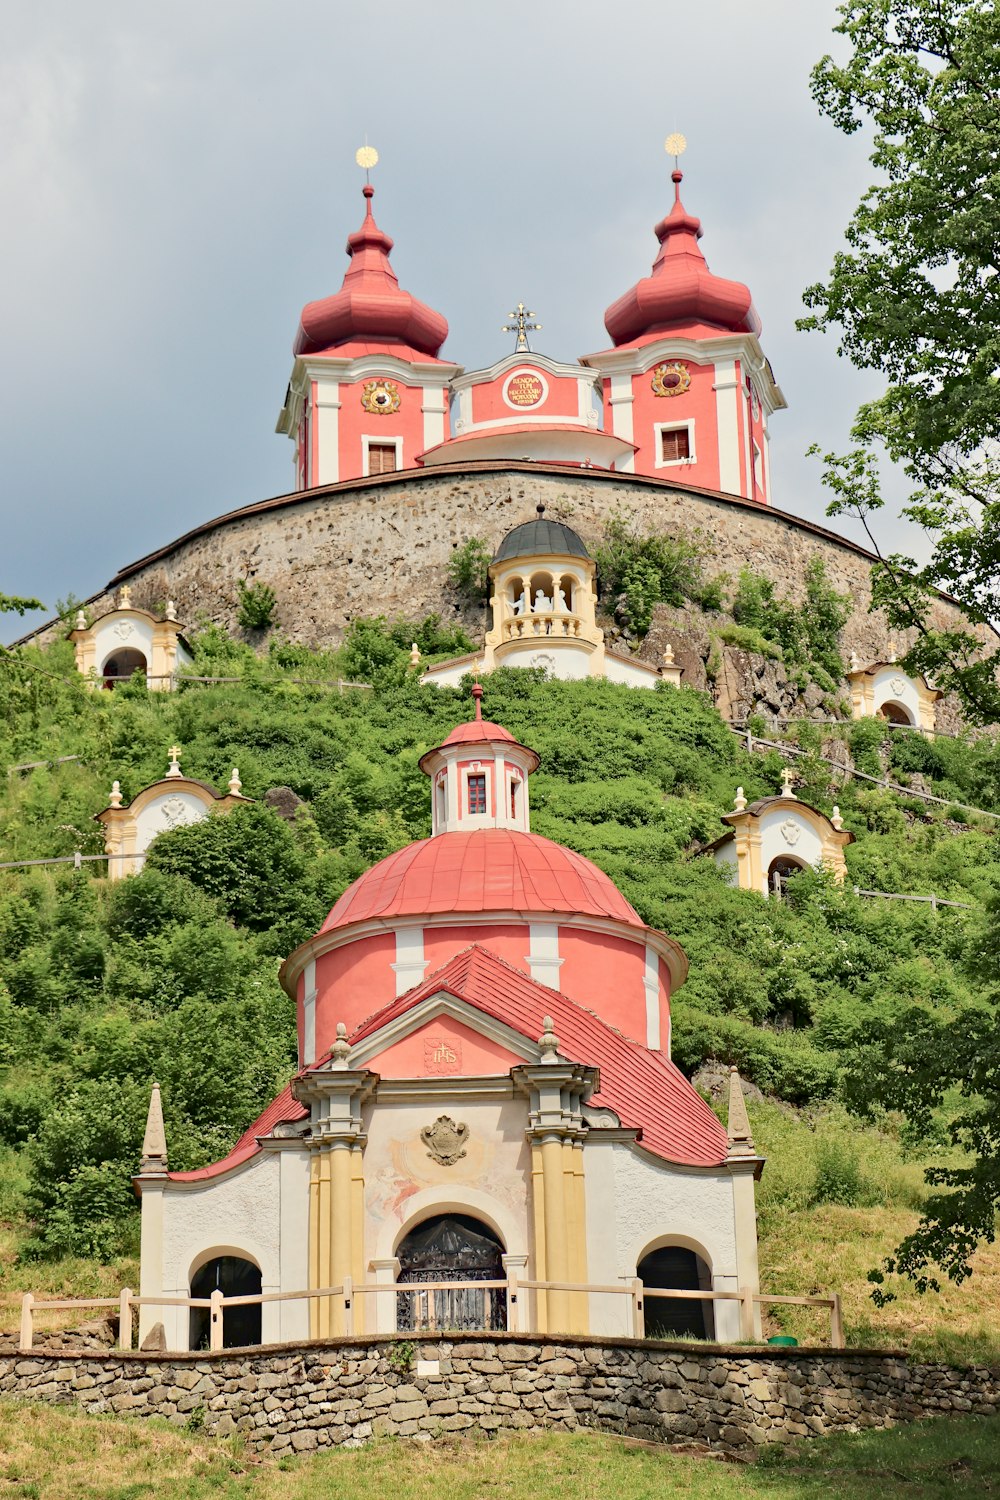 a church on a hill with a steeple in the background